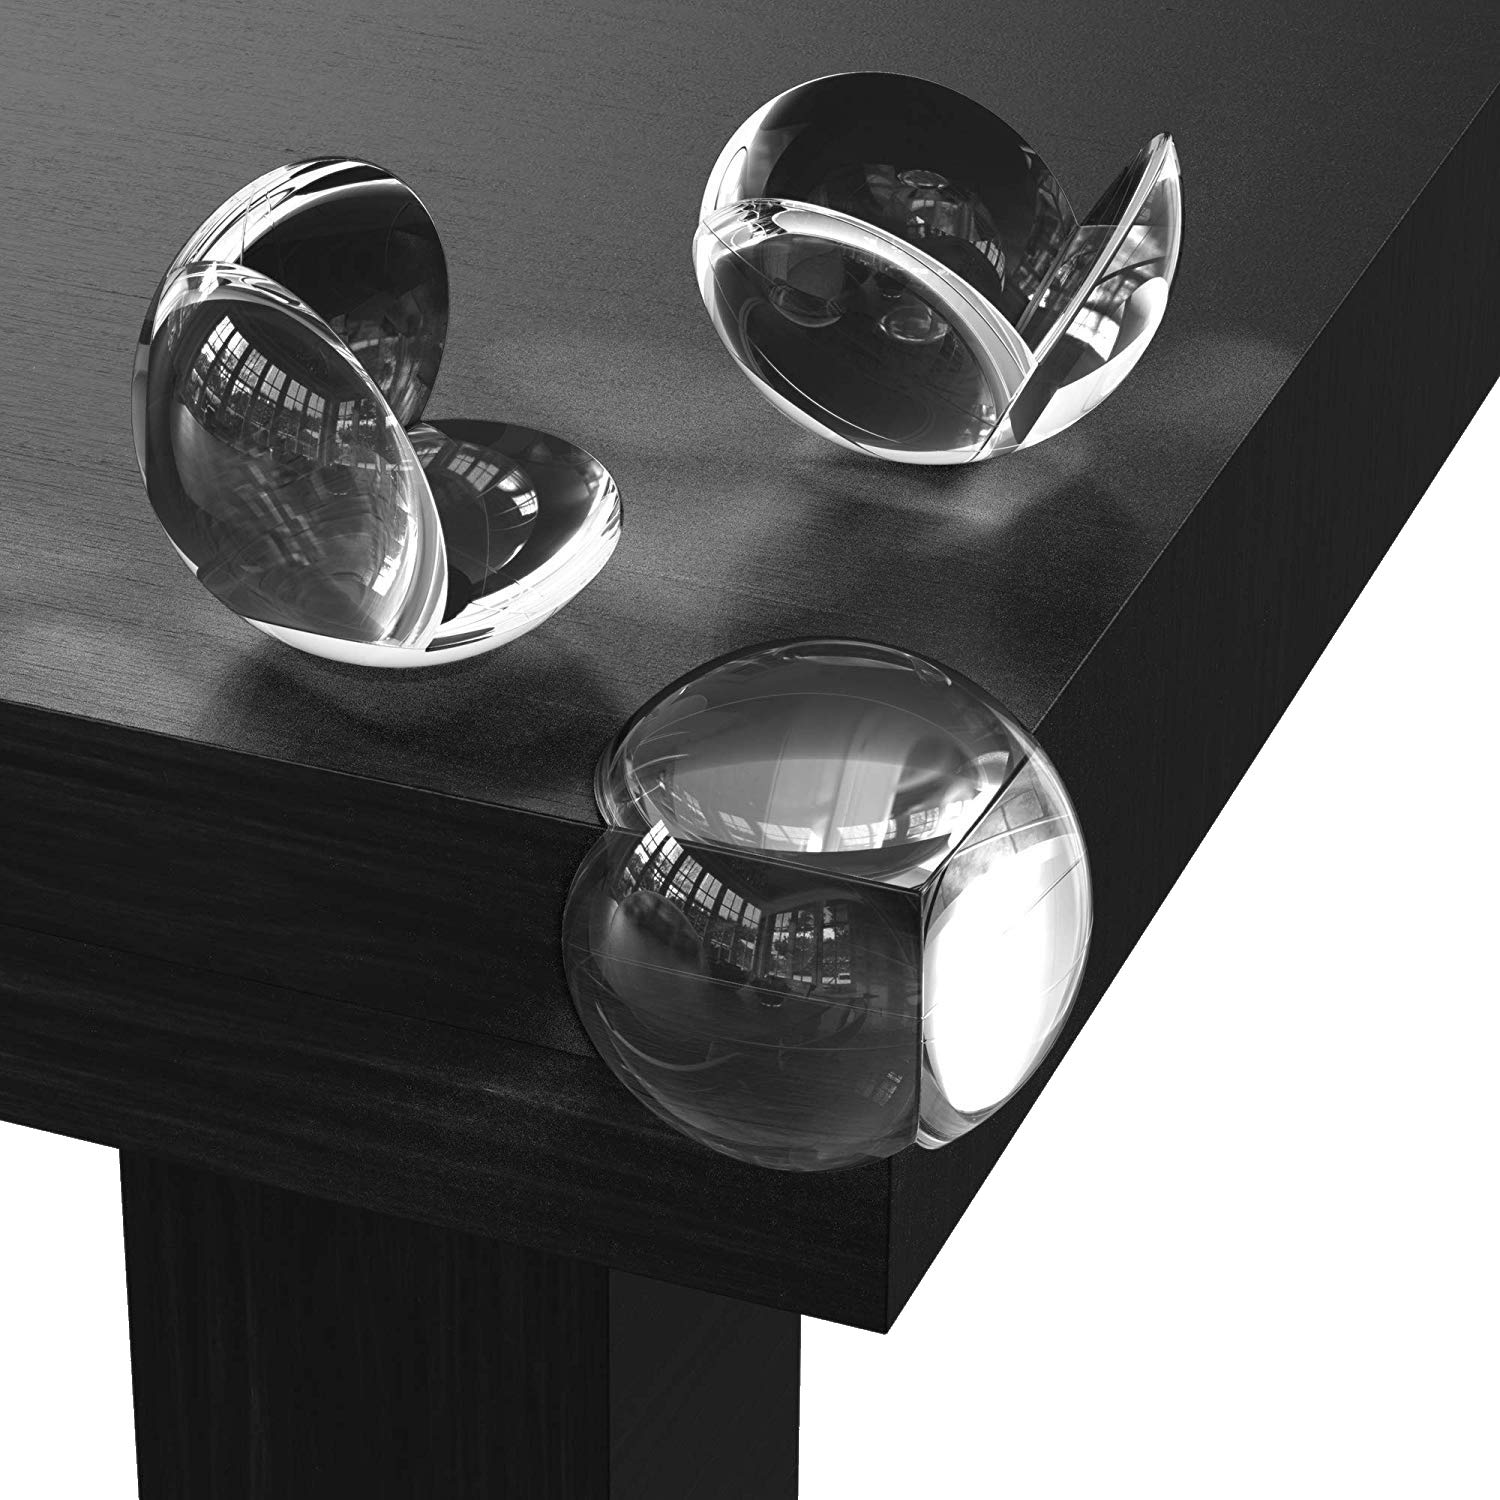 9 Best Table Corner Protectors 2022 - Review & Buying Guide 5